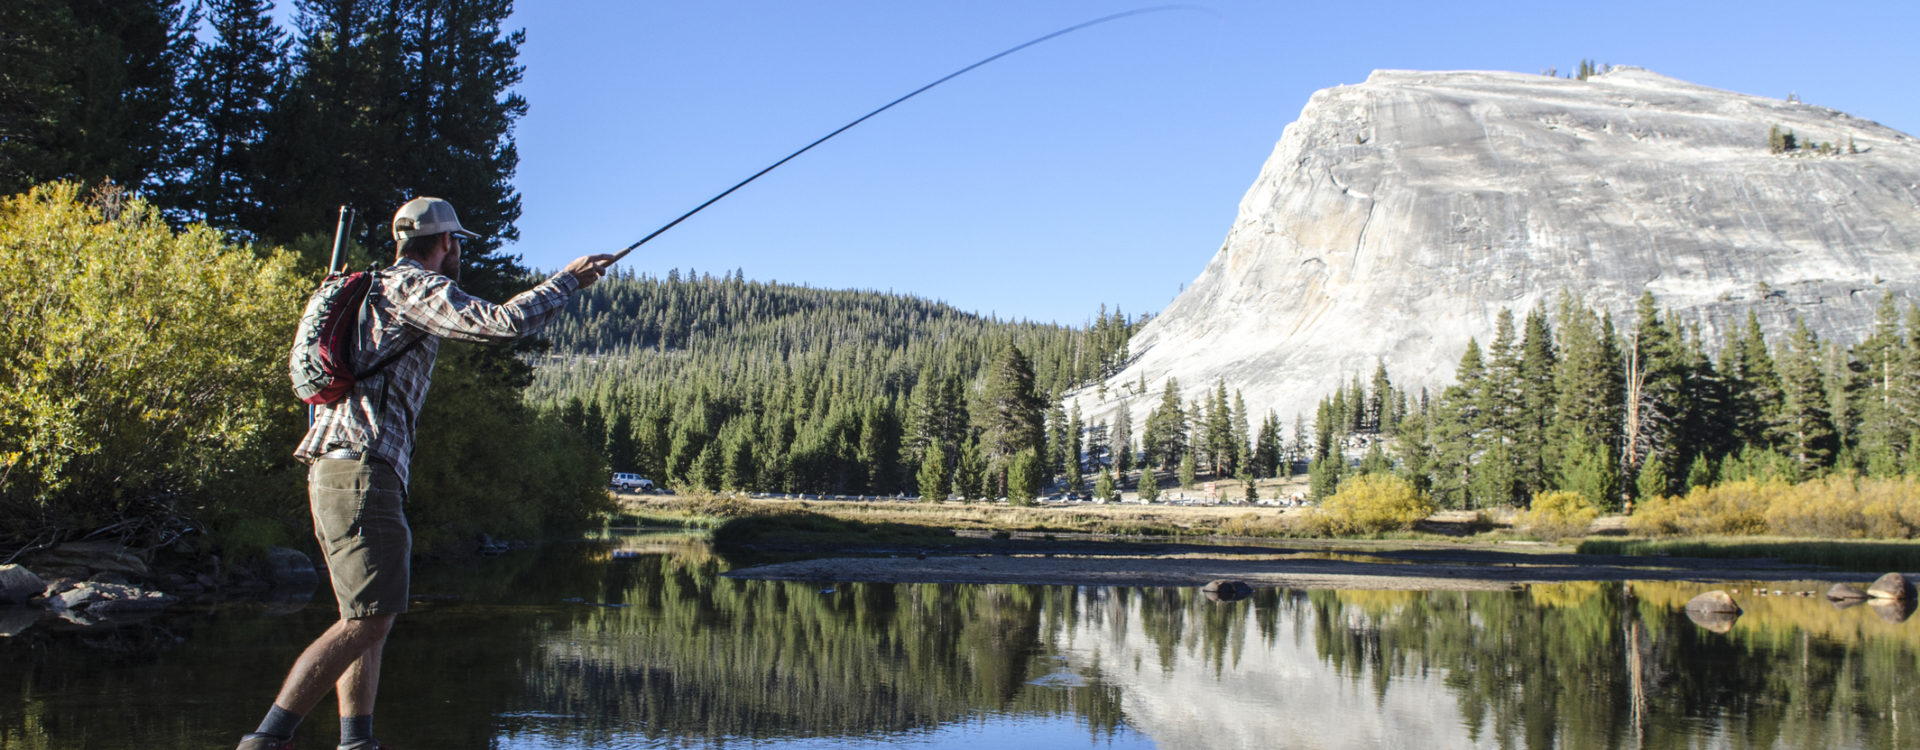 A young man fly-fishes in Tuolumne Meadows, California.